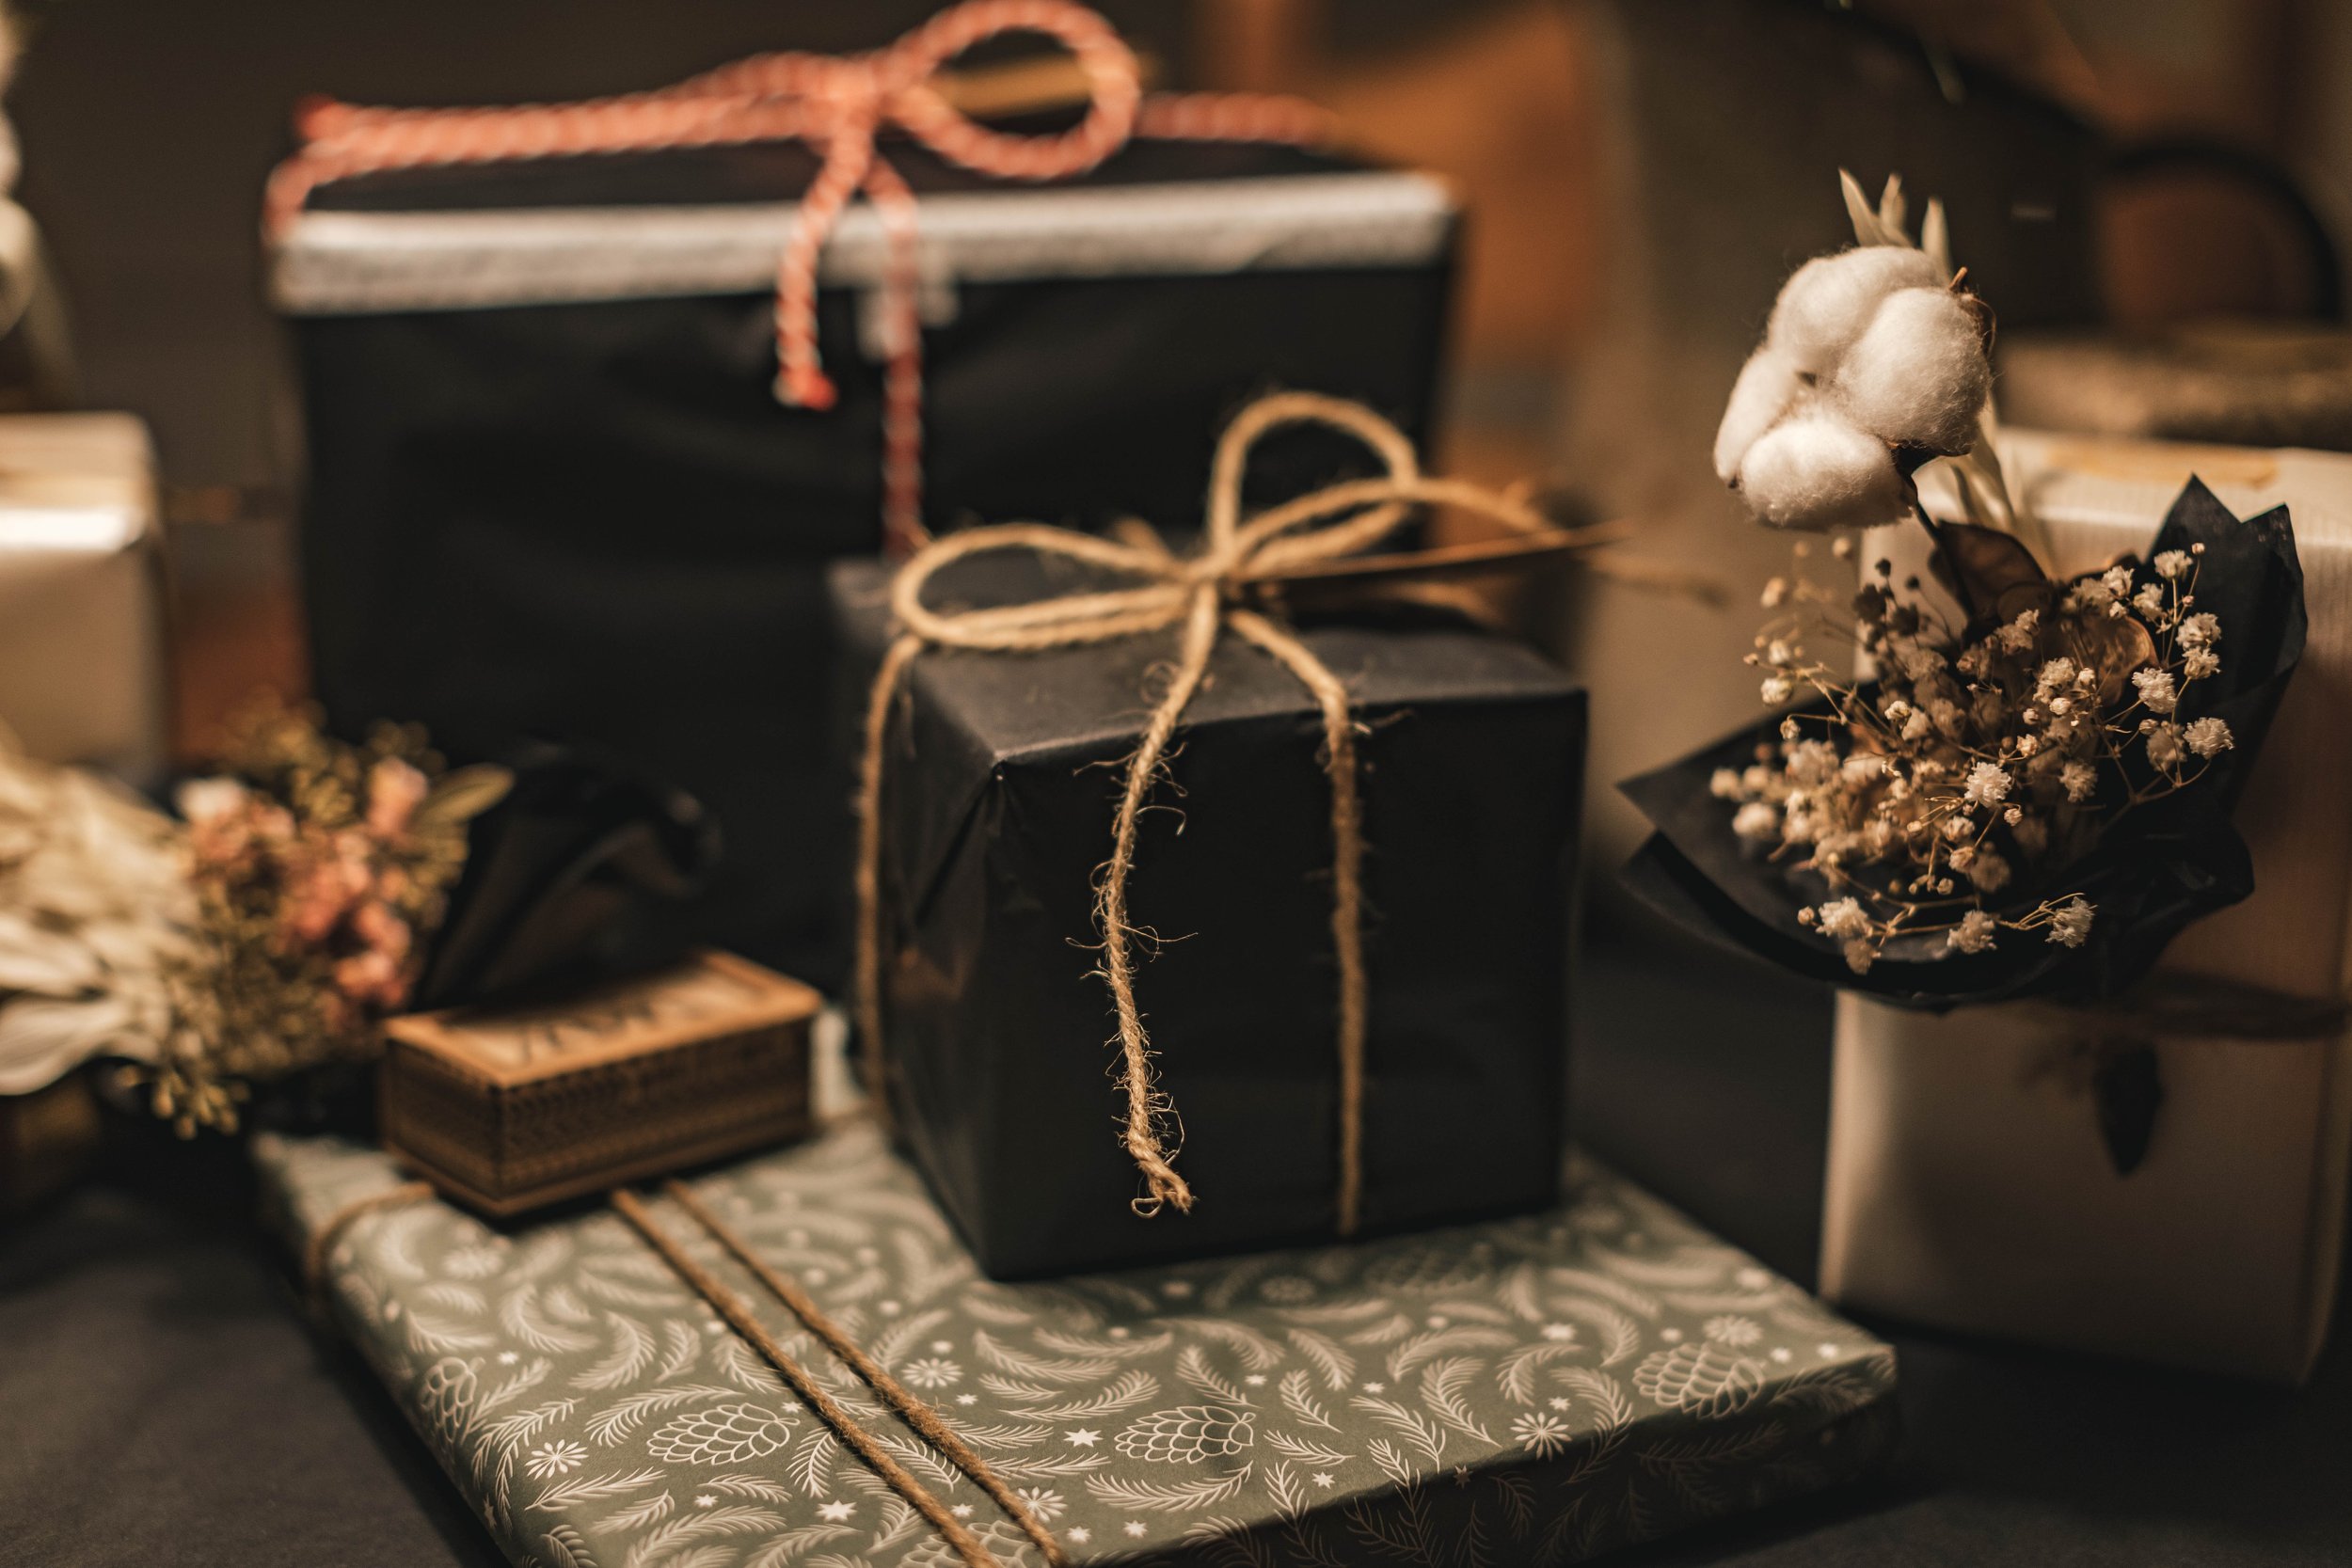 Wrapin ‑ Gift Wrap & Options - Allow customers to select gift wrap